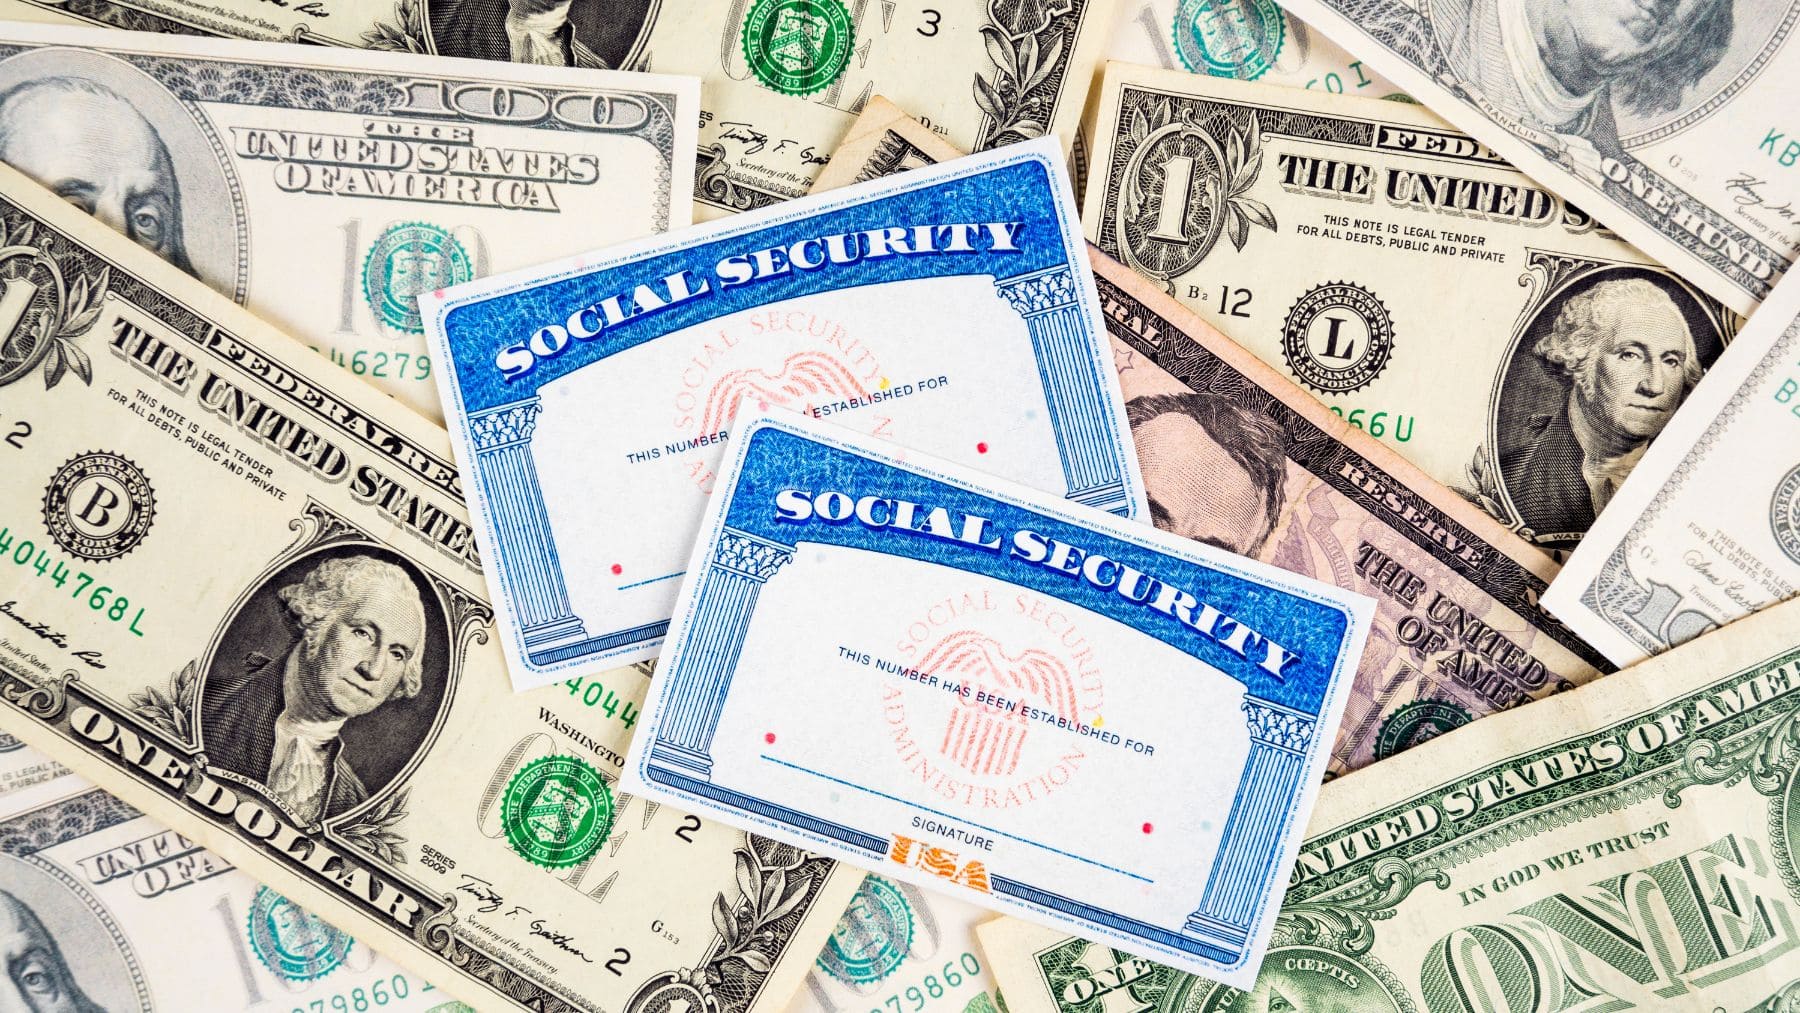 These are the Social Security Disability Income cards and the money for the beneficiaries